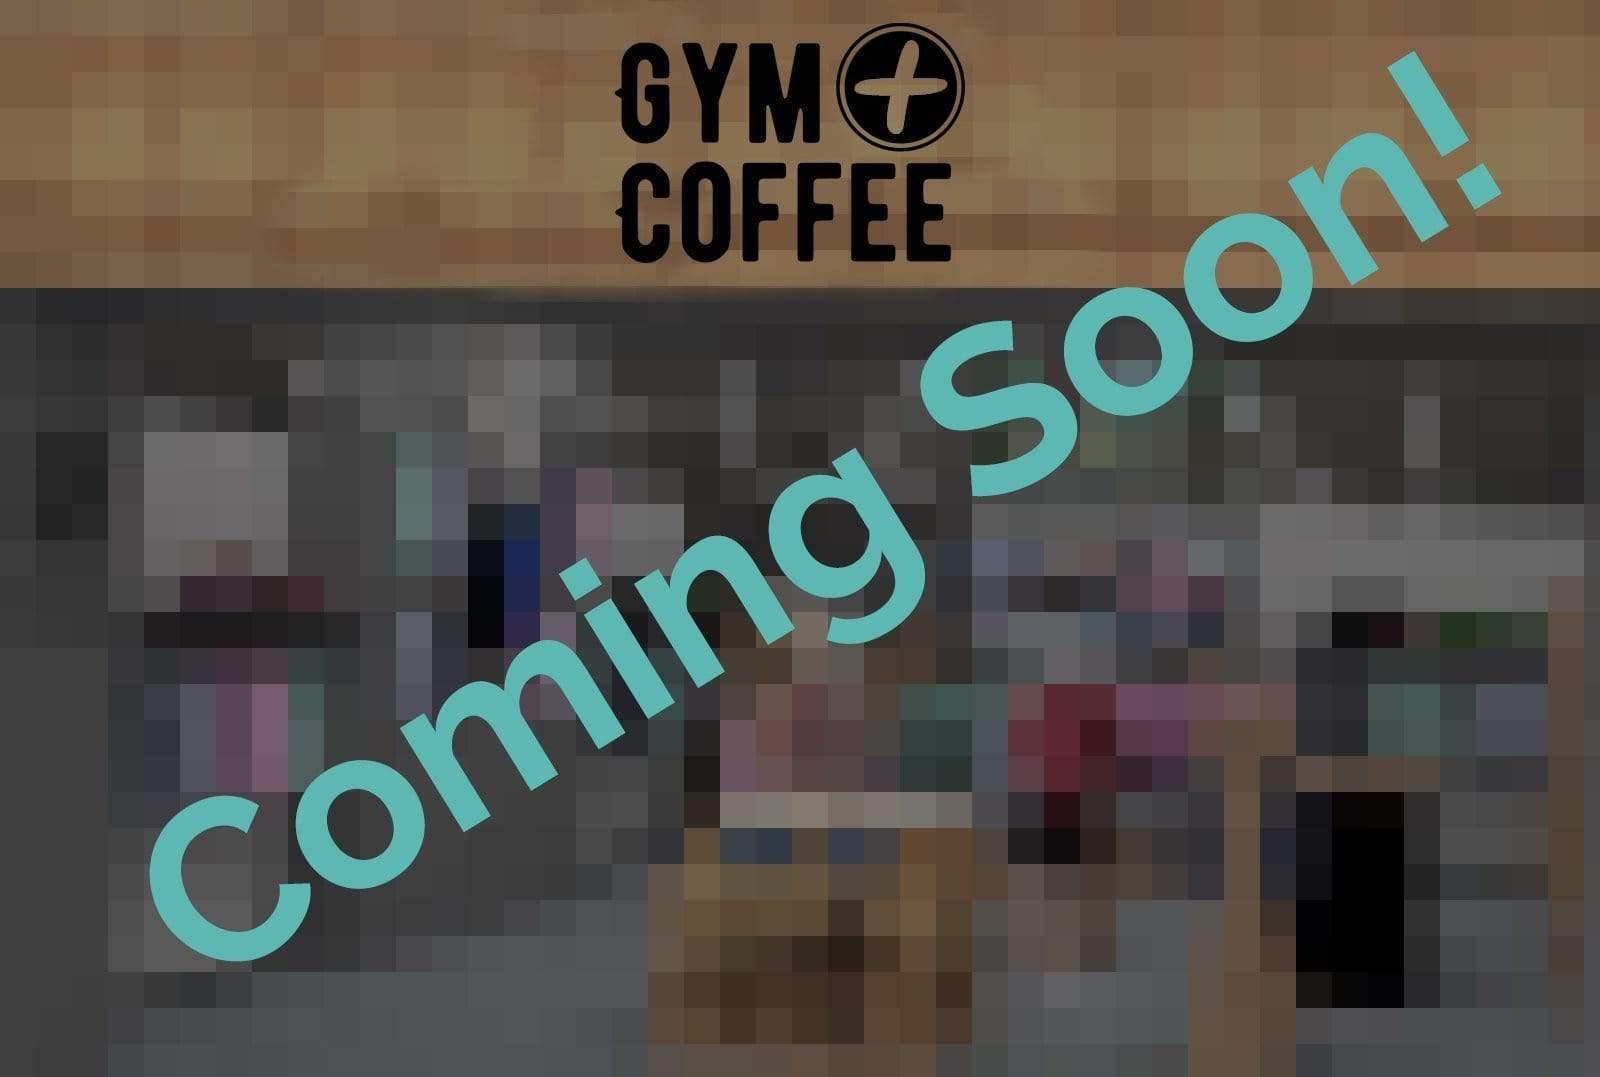 G+C is Popping Up!!! - Gym+Coffee